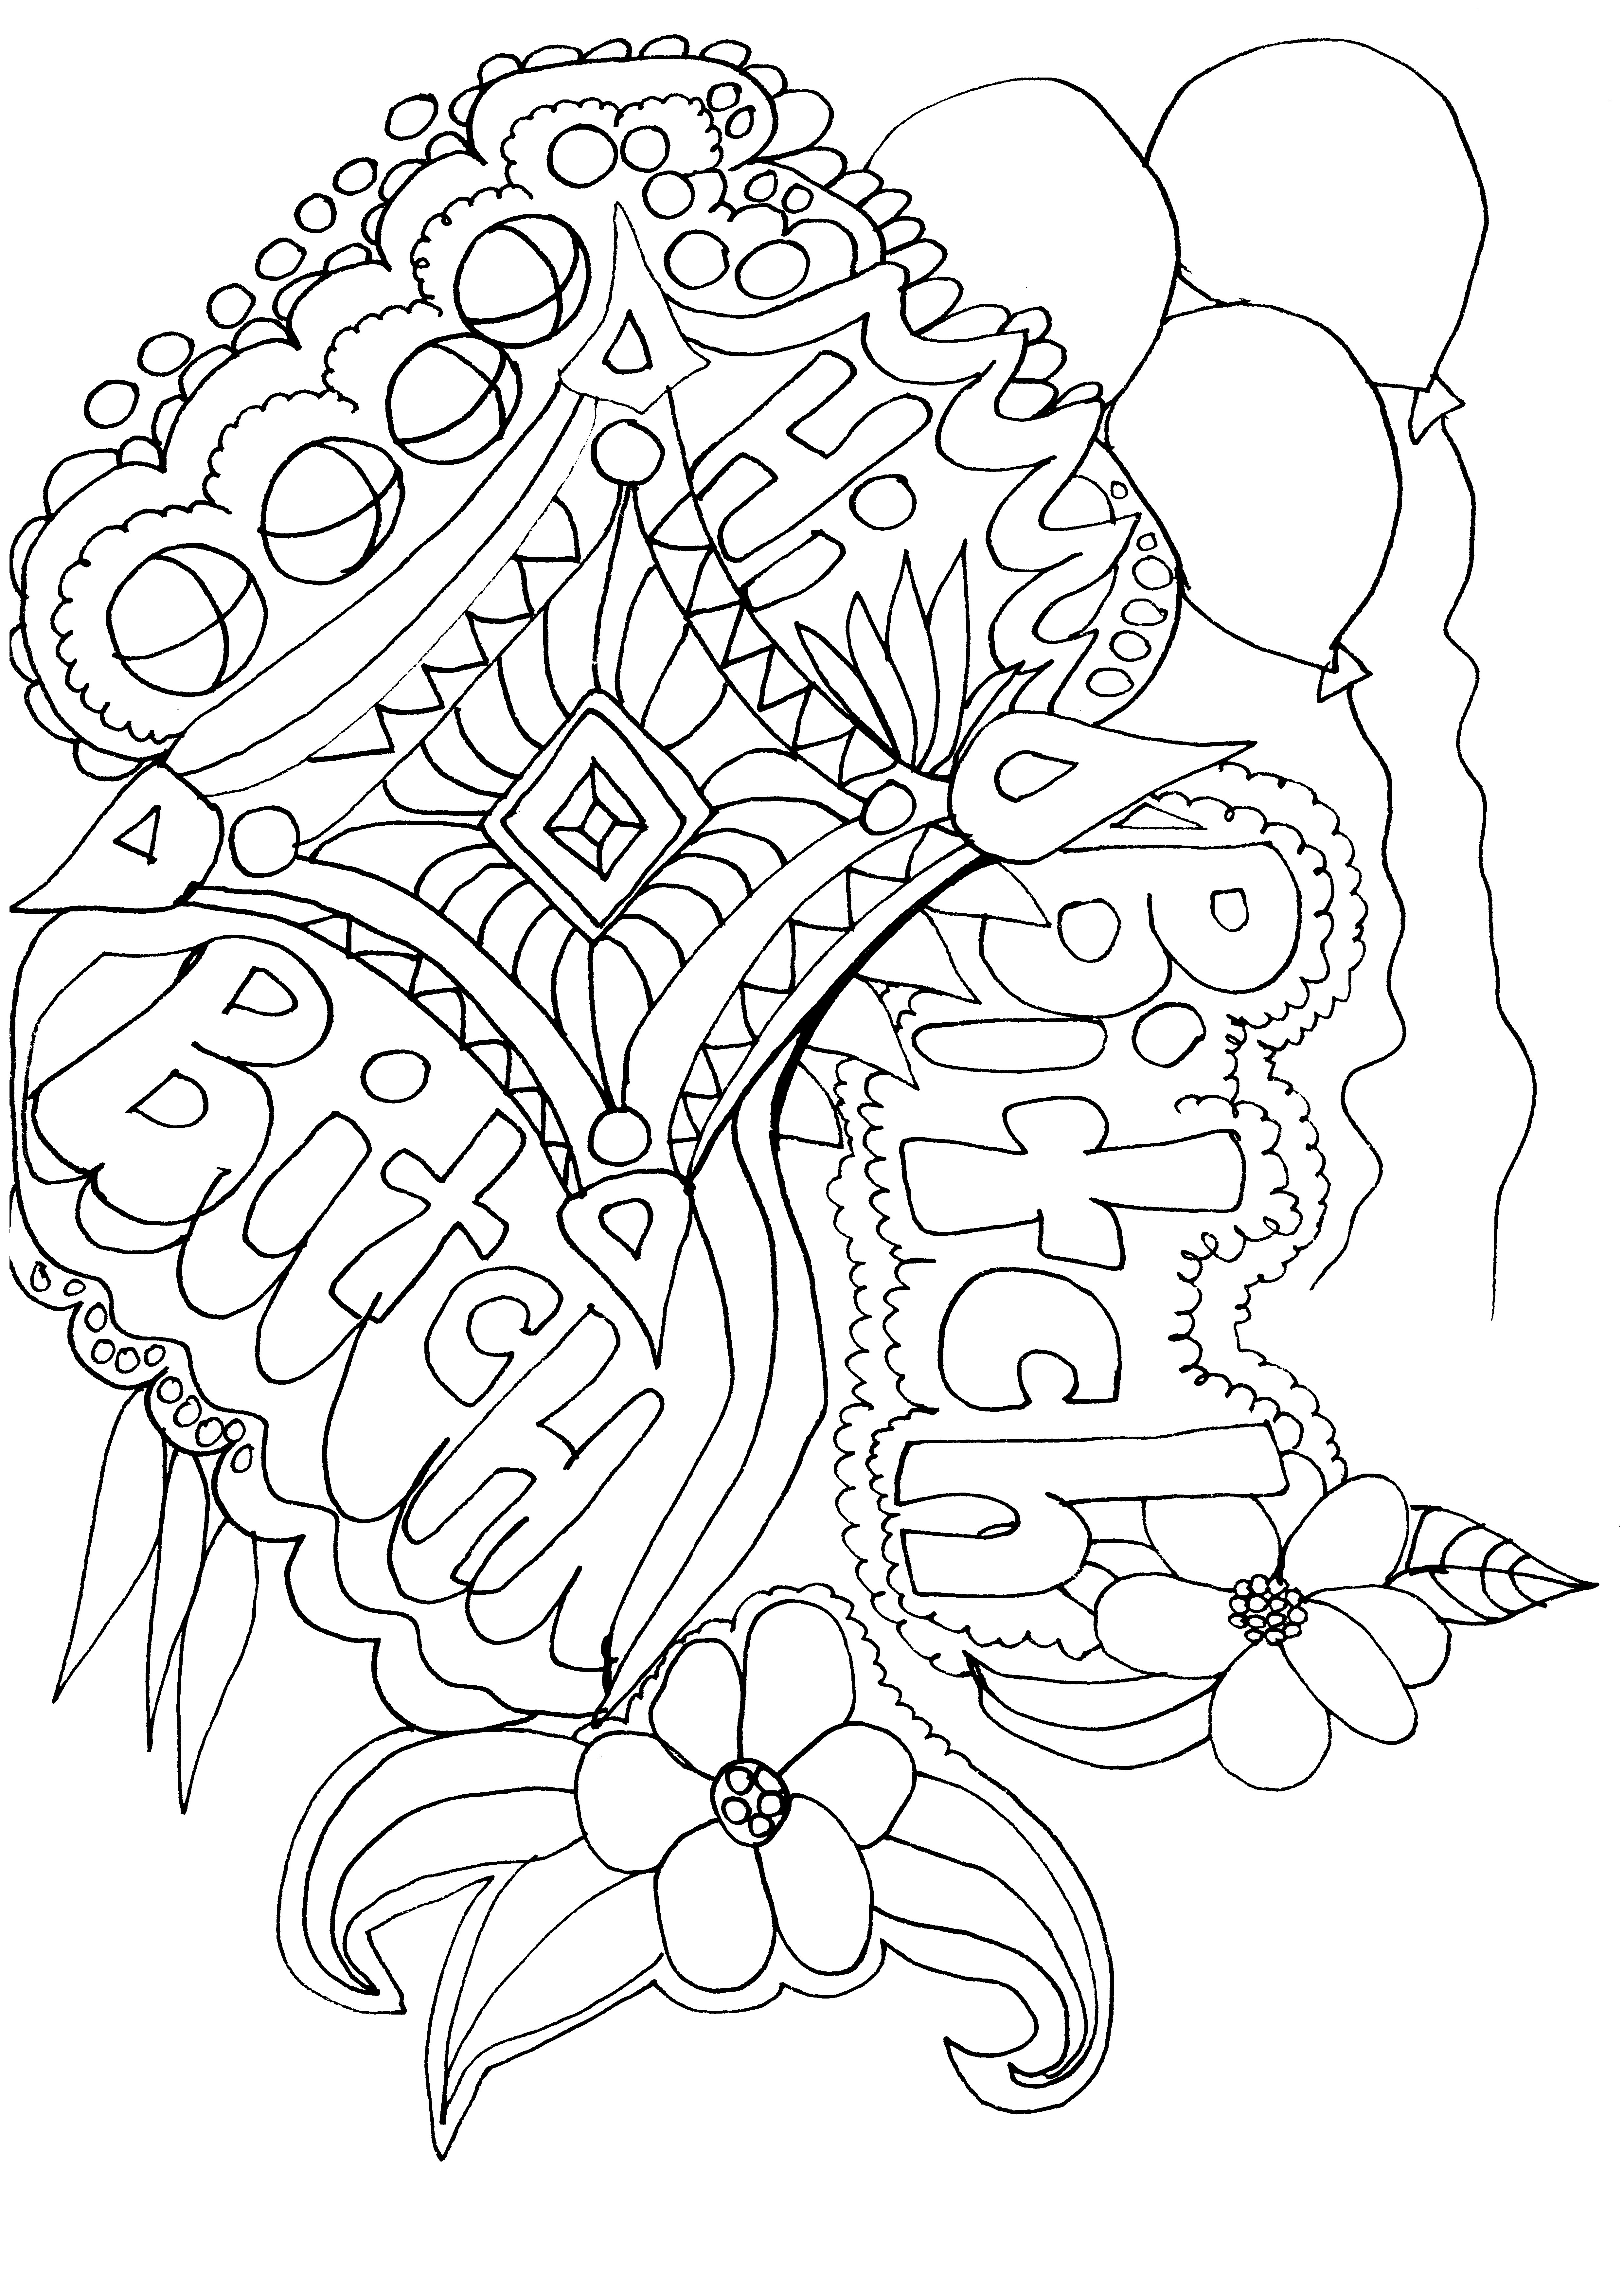 Aesthetic Preppy Coloring Pages Pdf to Print - Printable Aesthetic Preppy Coloring Pages